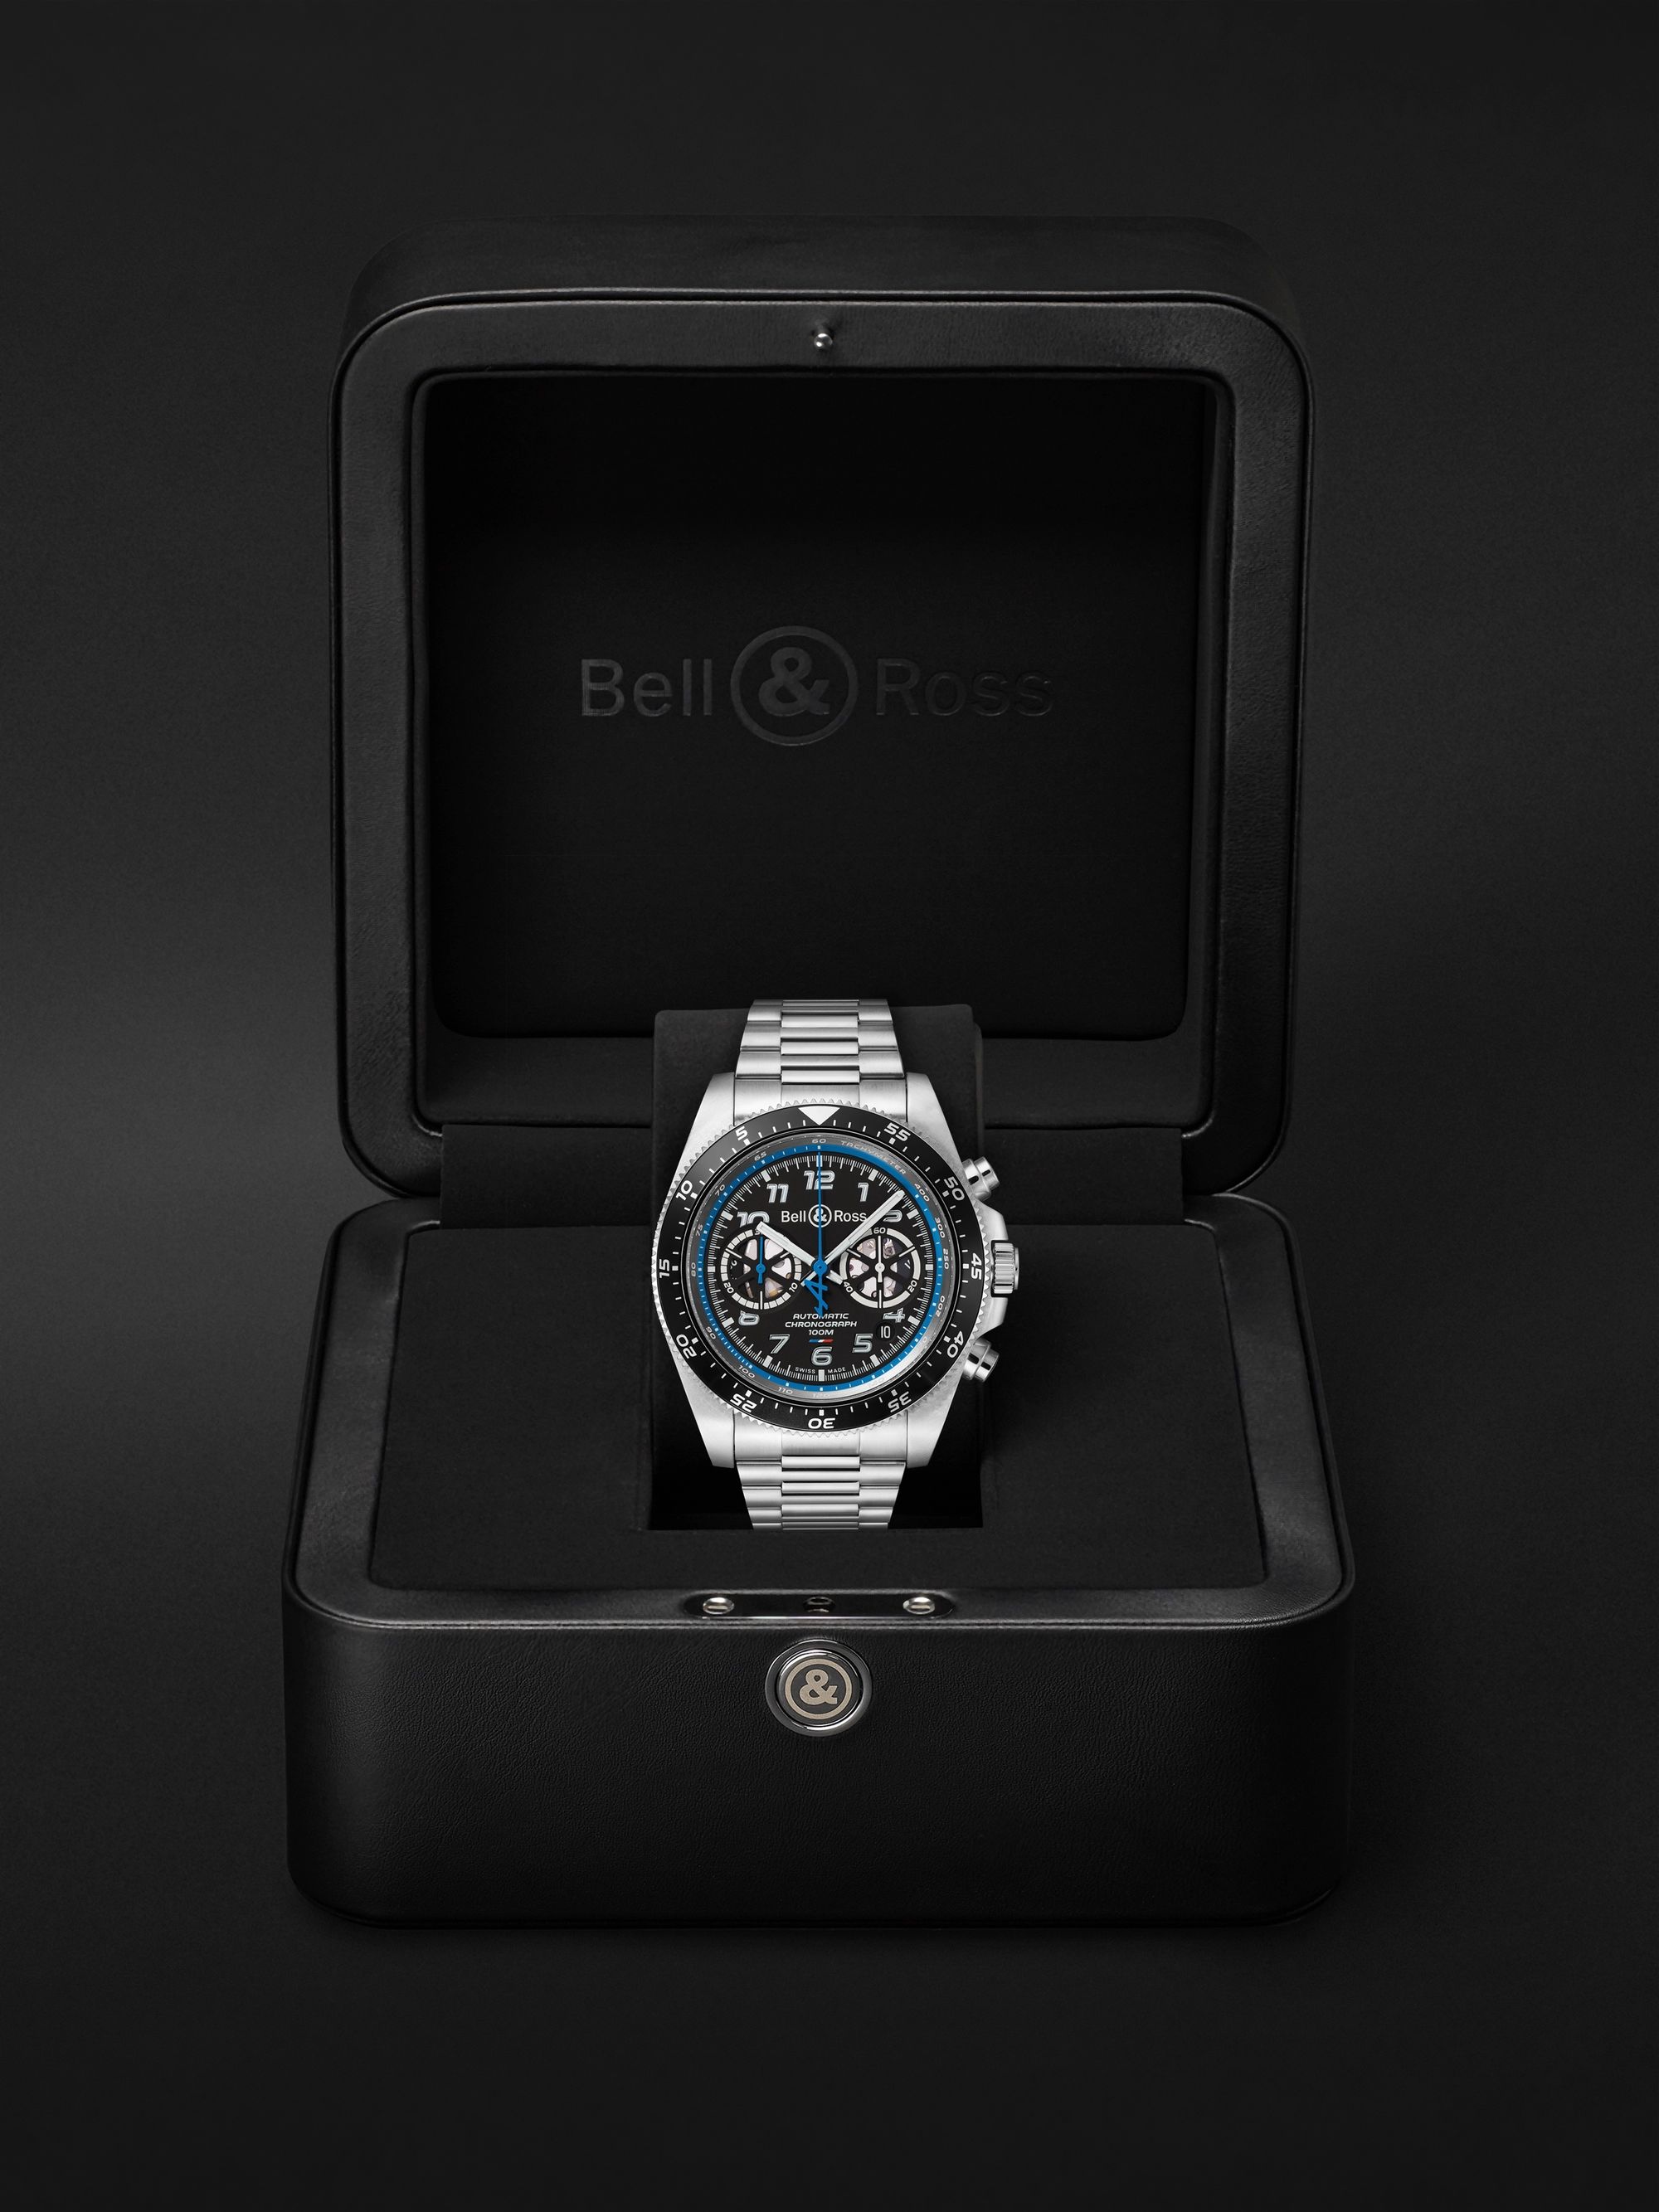 BELL & ROSS BR V3-94 A.5.21 Limited Edition Automatic Chronograph 43mm Stainless Steel Watch, Ref. No. BRV394-A521/SST